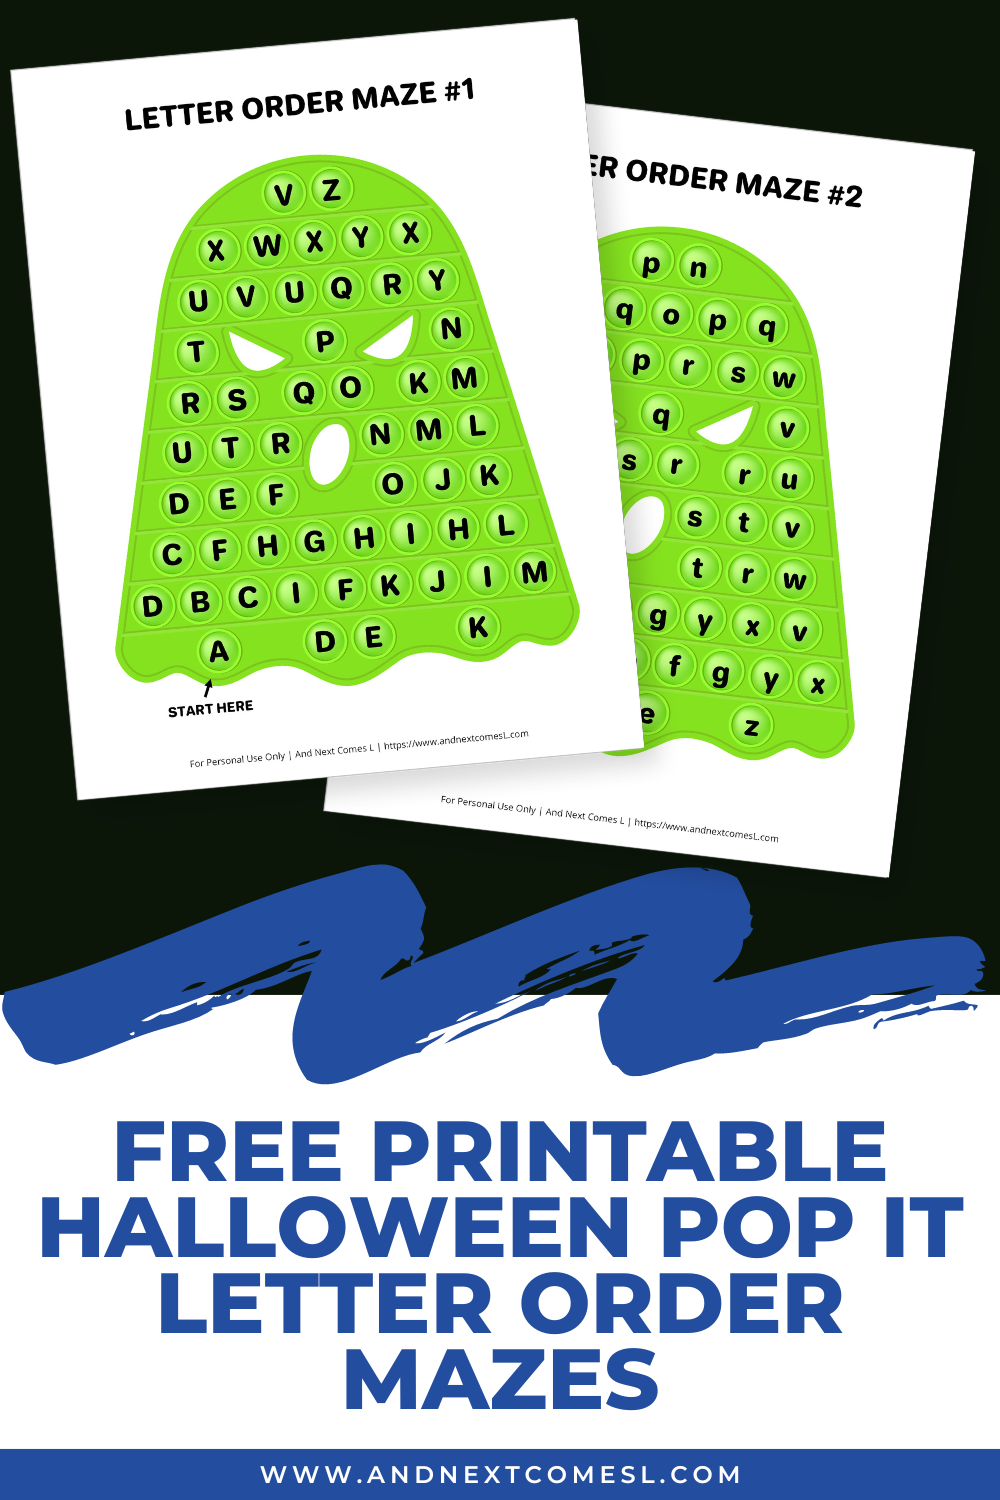 Free printable Halloween ghost pop it letter order mazes - a fun Halloween alphabet activity for kids!